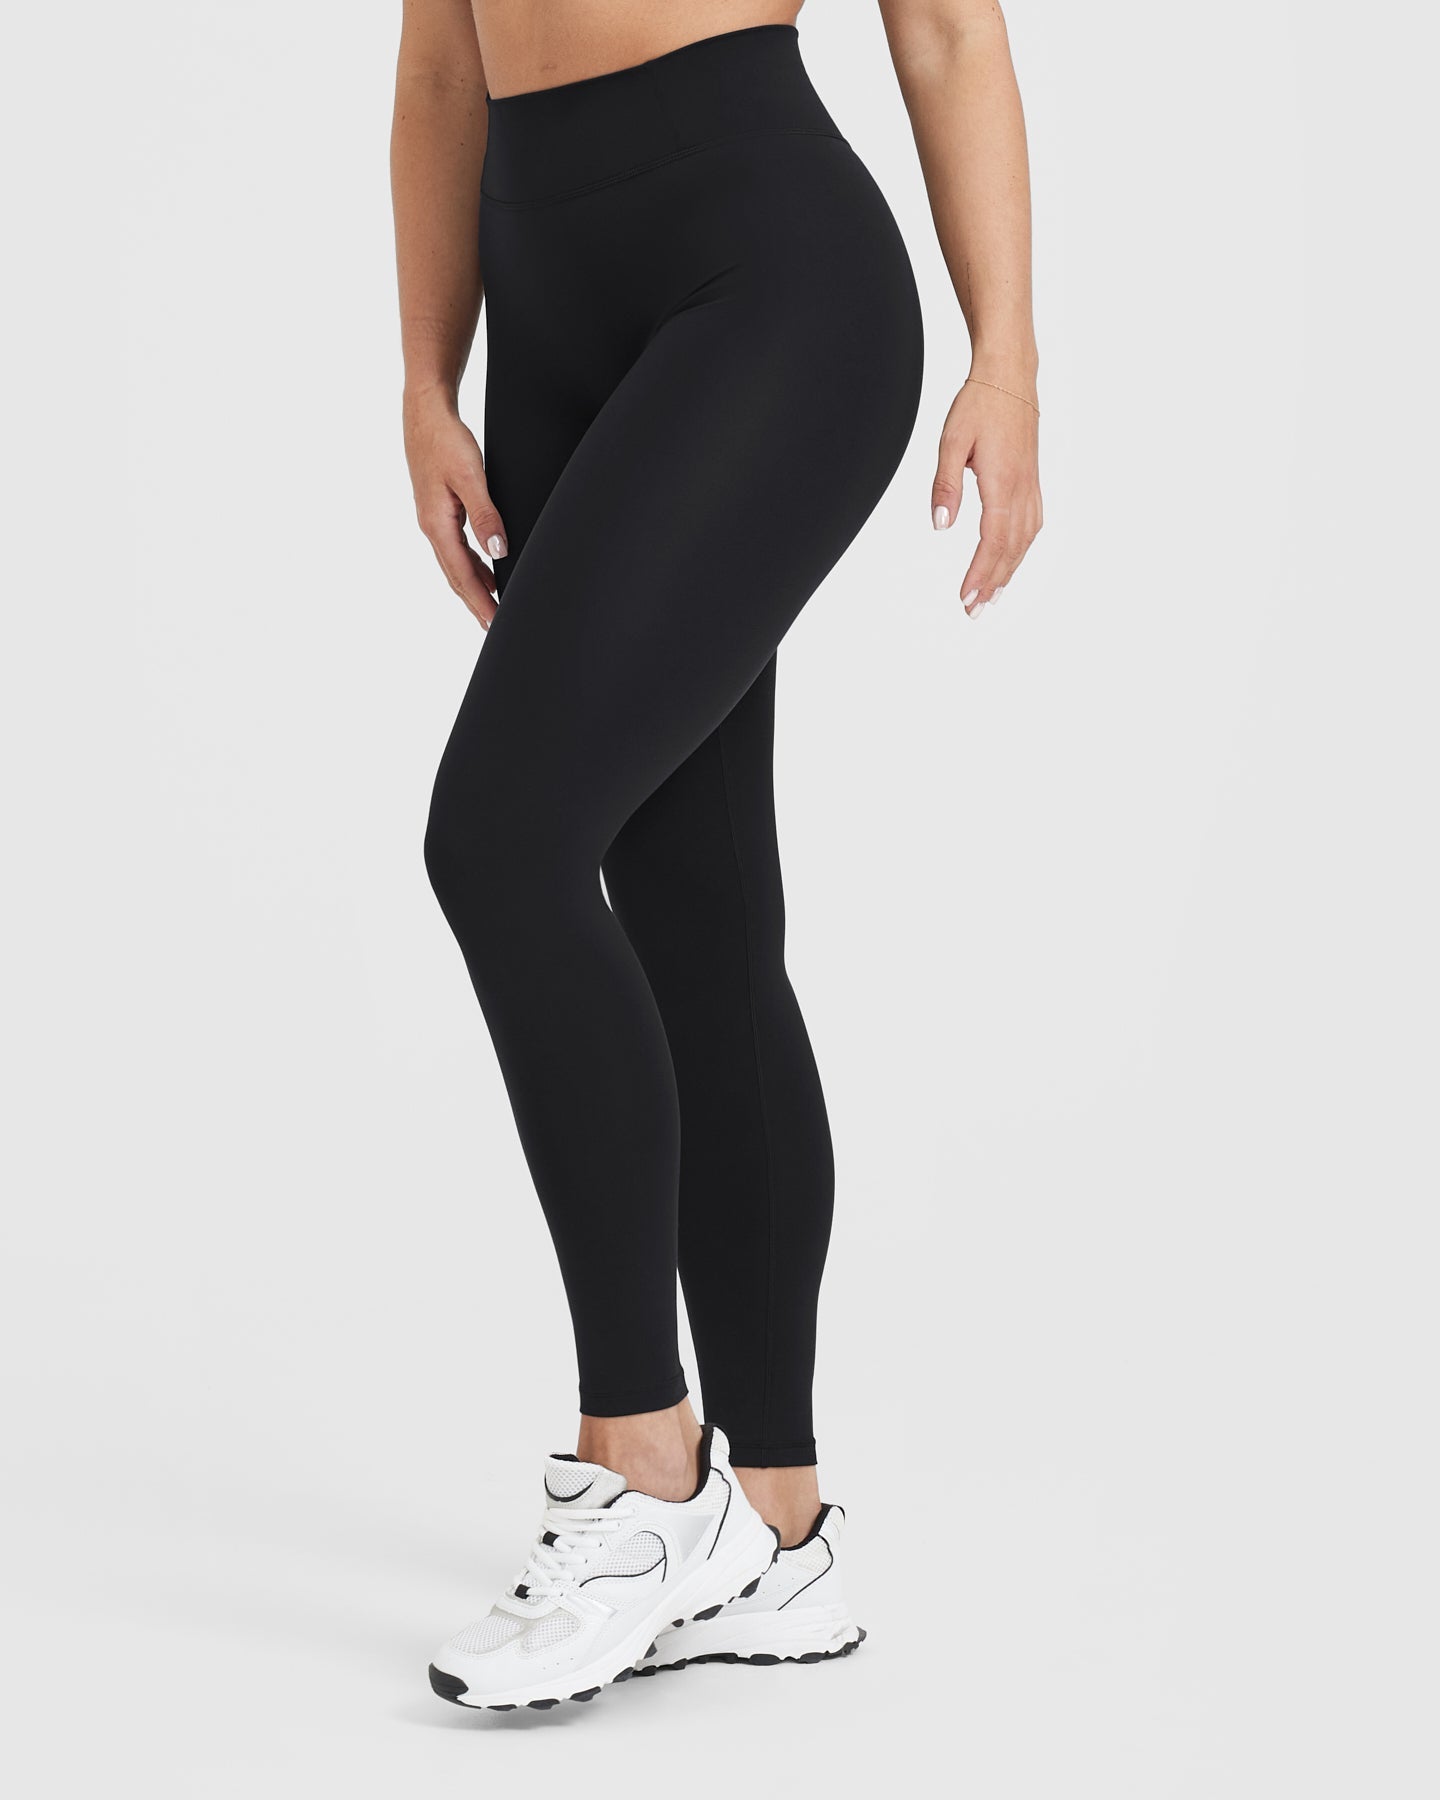 fabletics high waisted seamless classic leggings black size SMALL